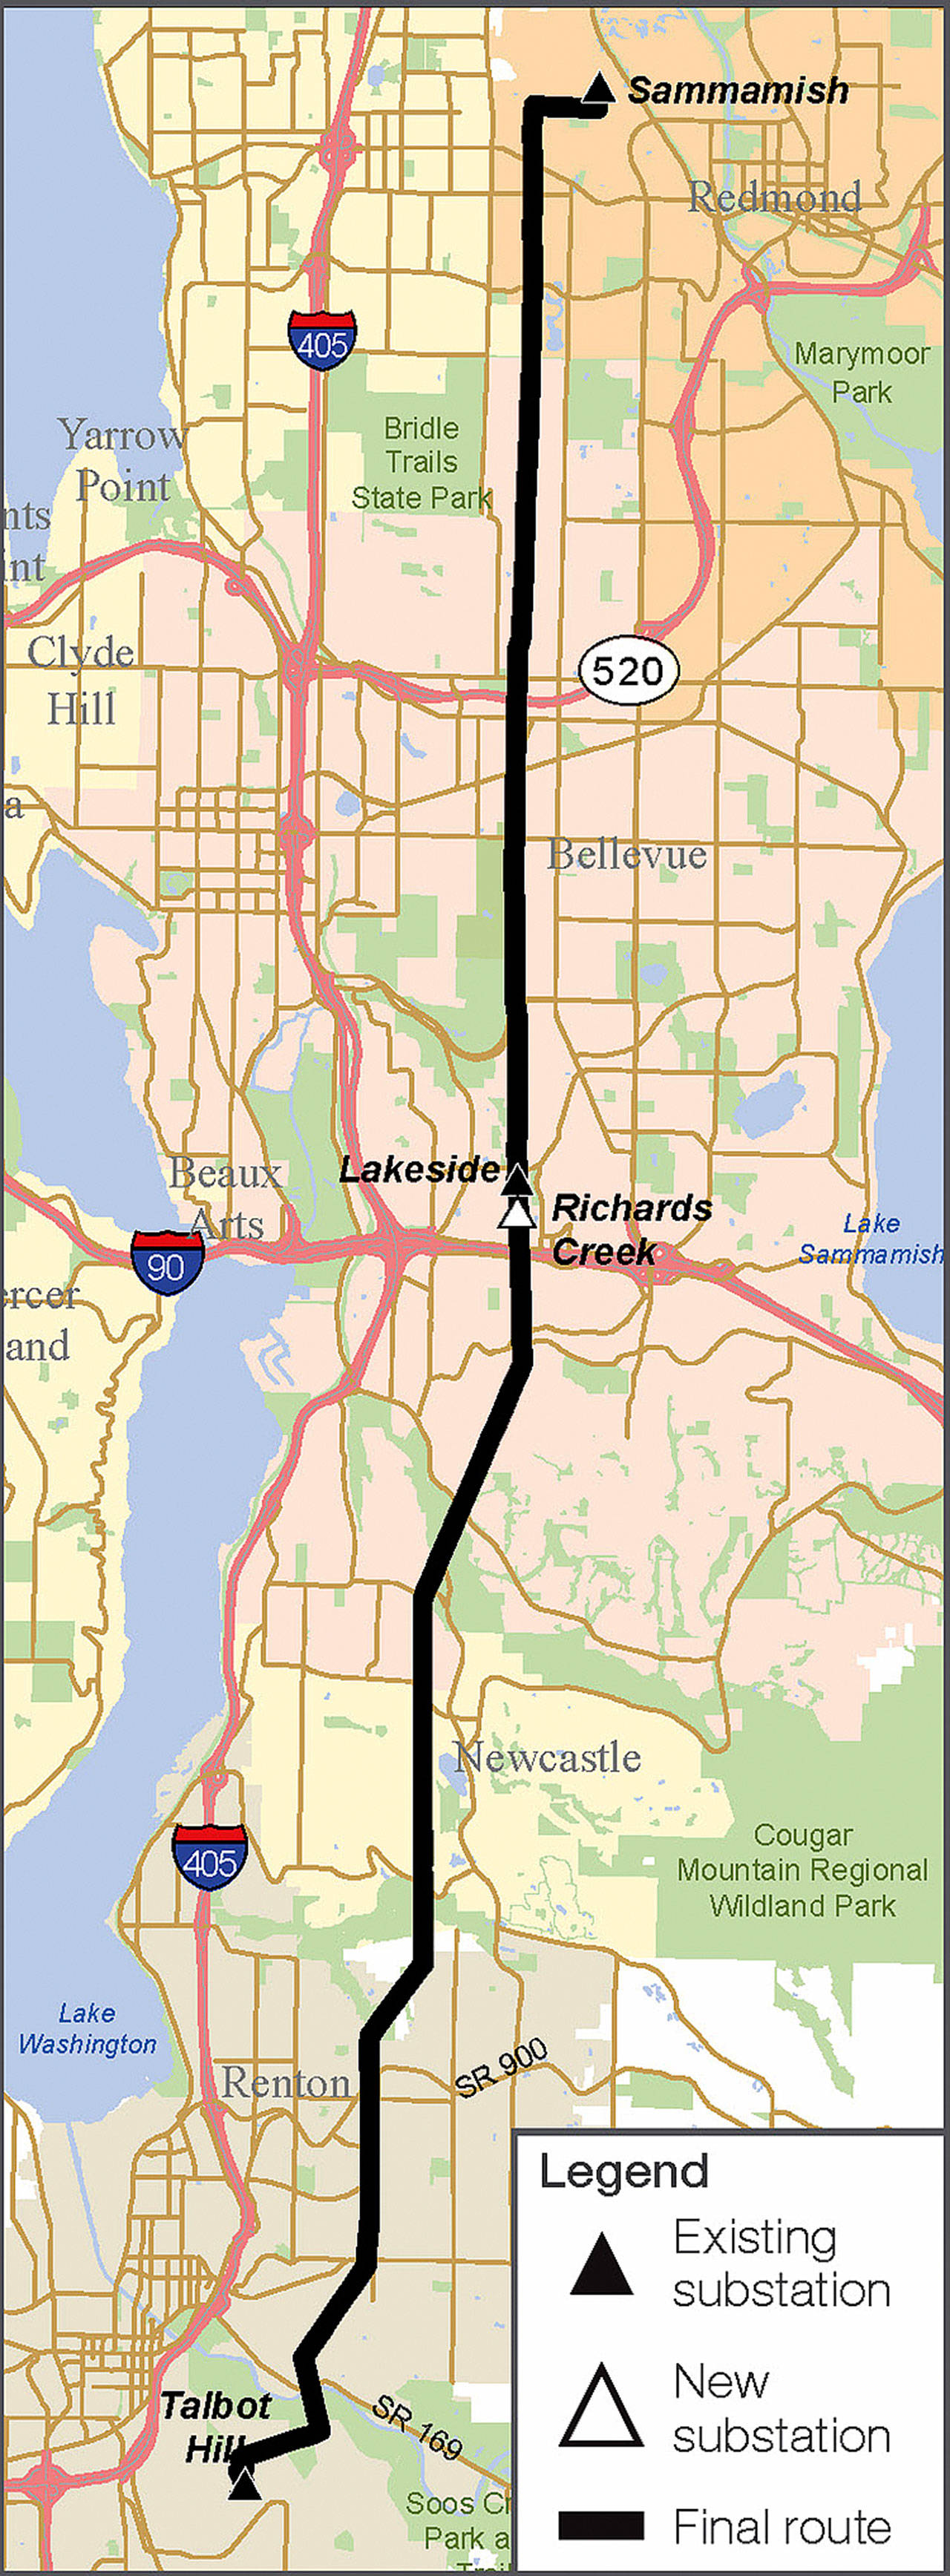 Energize Eastside will start in Redmond and end in Renton with a new substation in Bellevue. Map courtesy of Puget Sound Energy